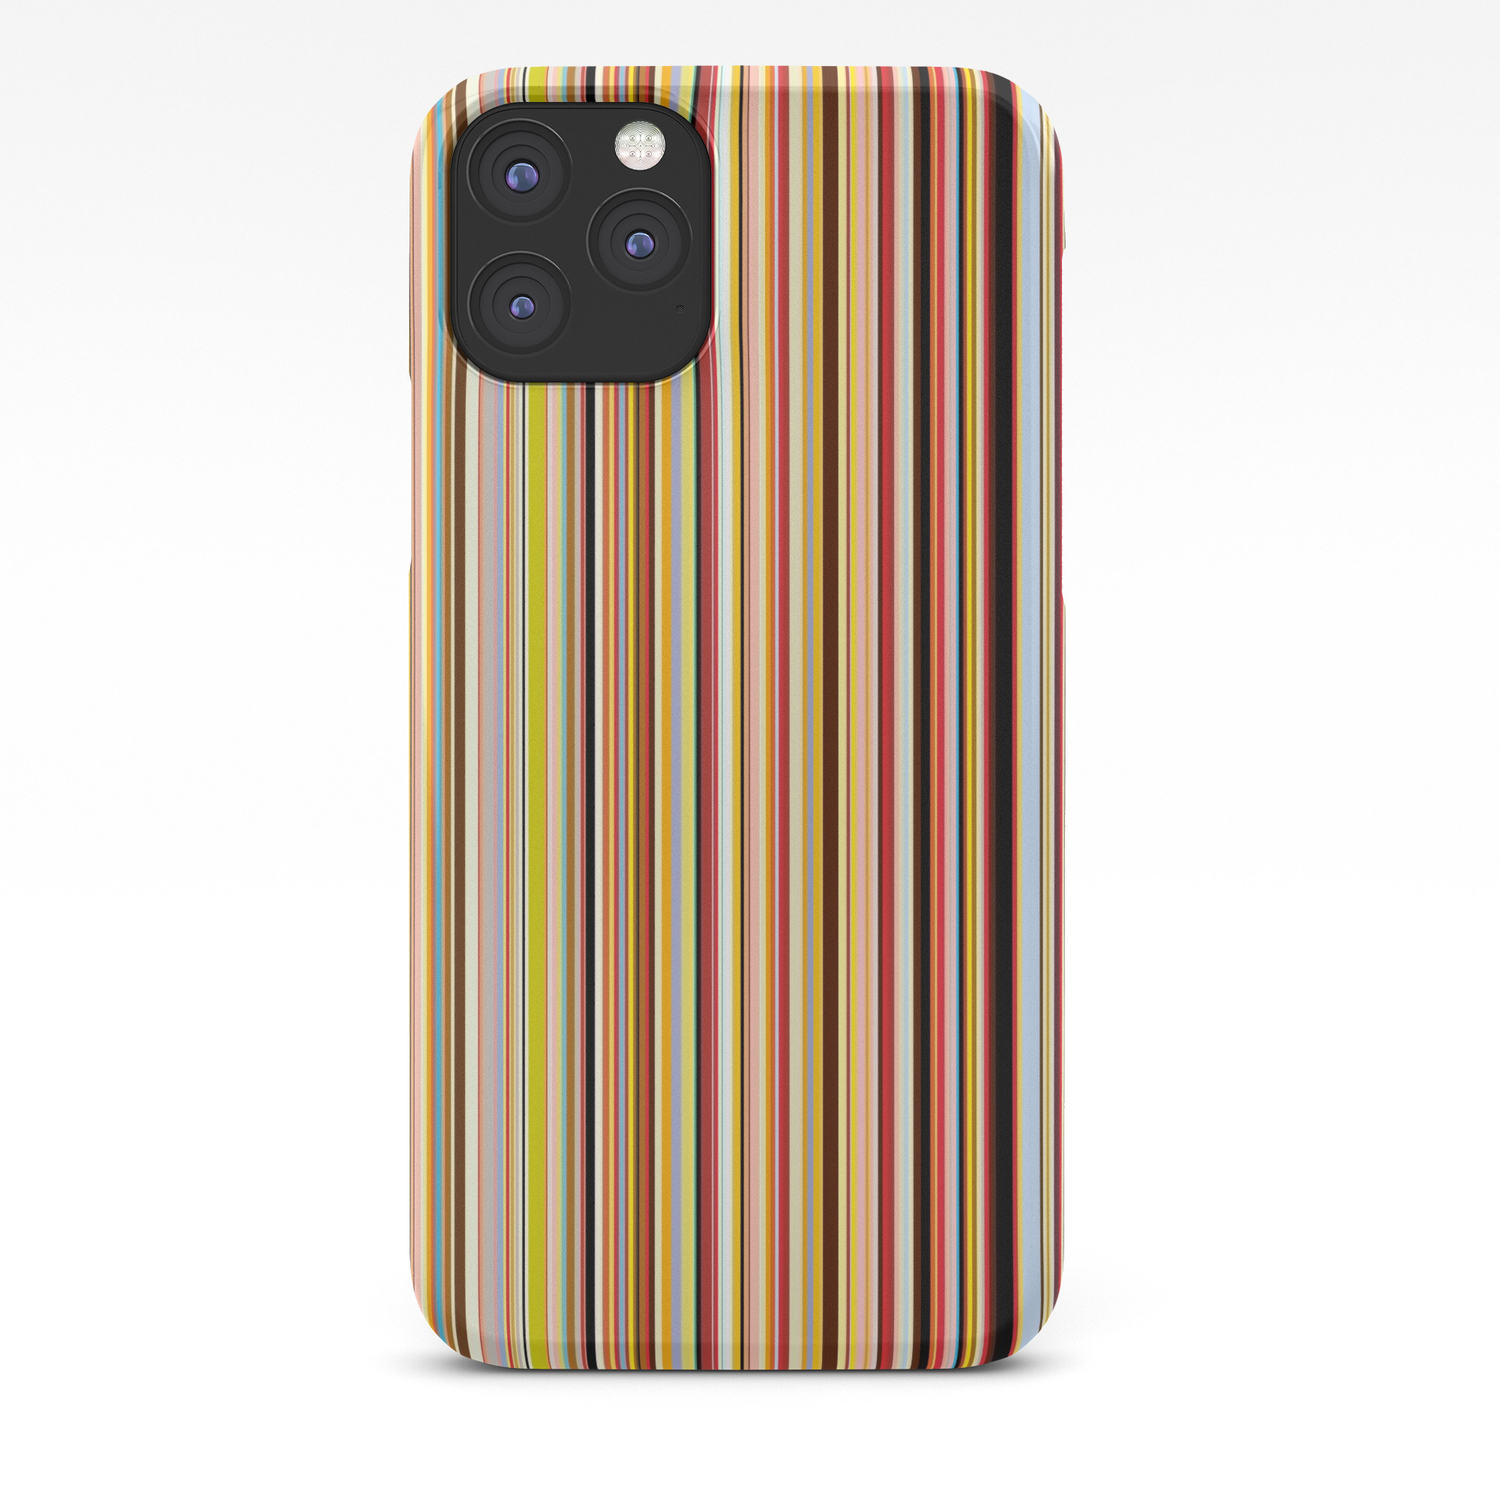 Paul Smith Iphone Case By Artism Group Society6